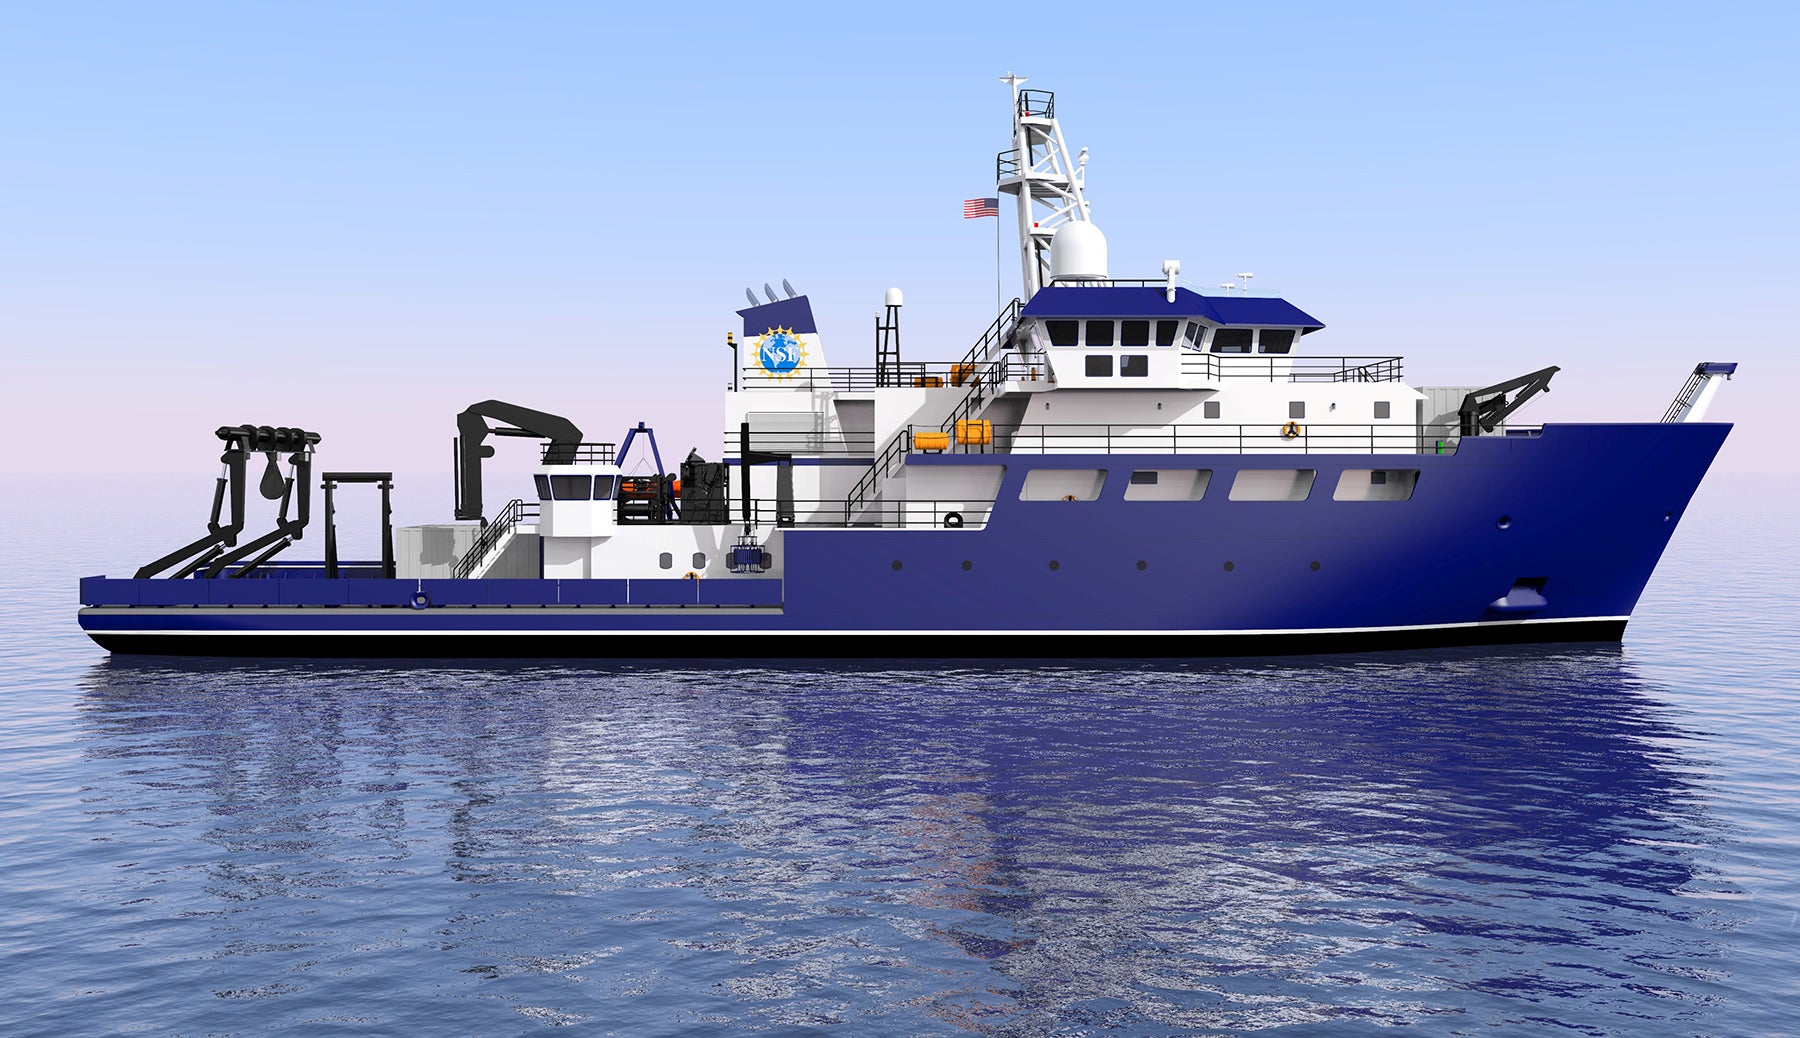 Artist’s rendering of the new Regional Class Research Vessel